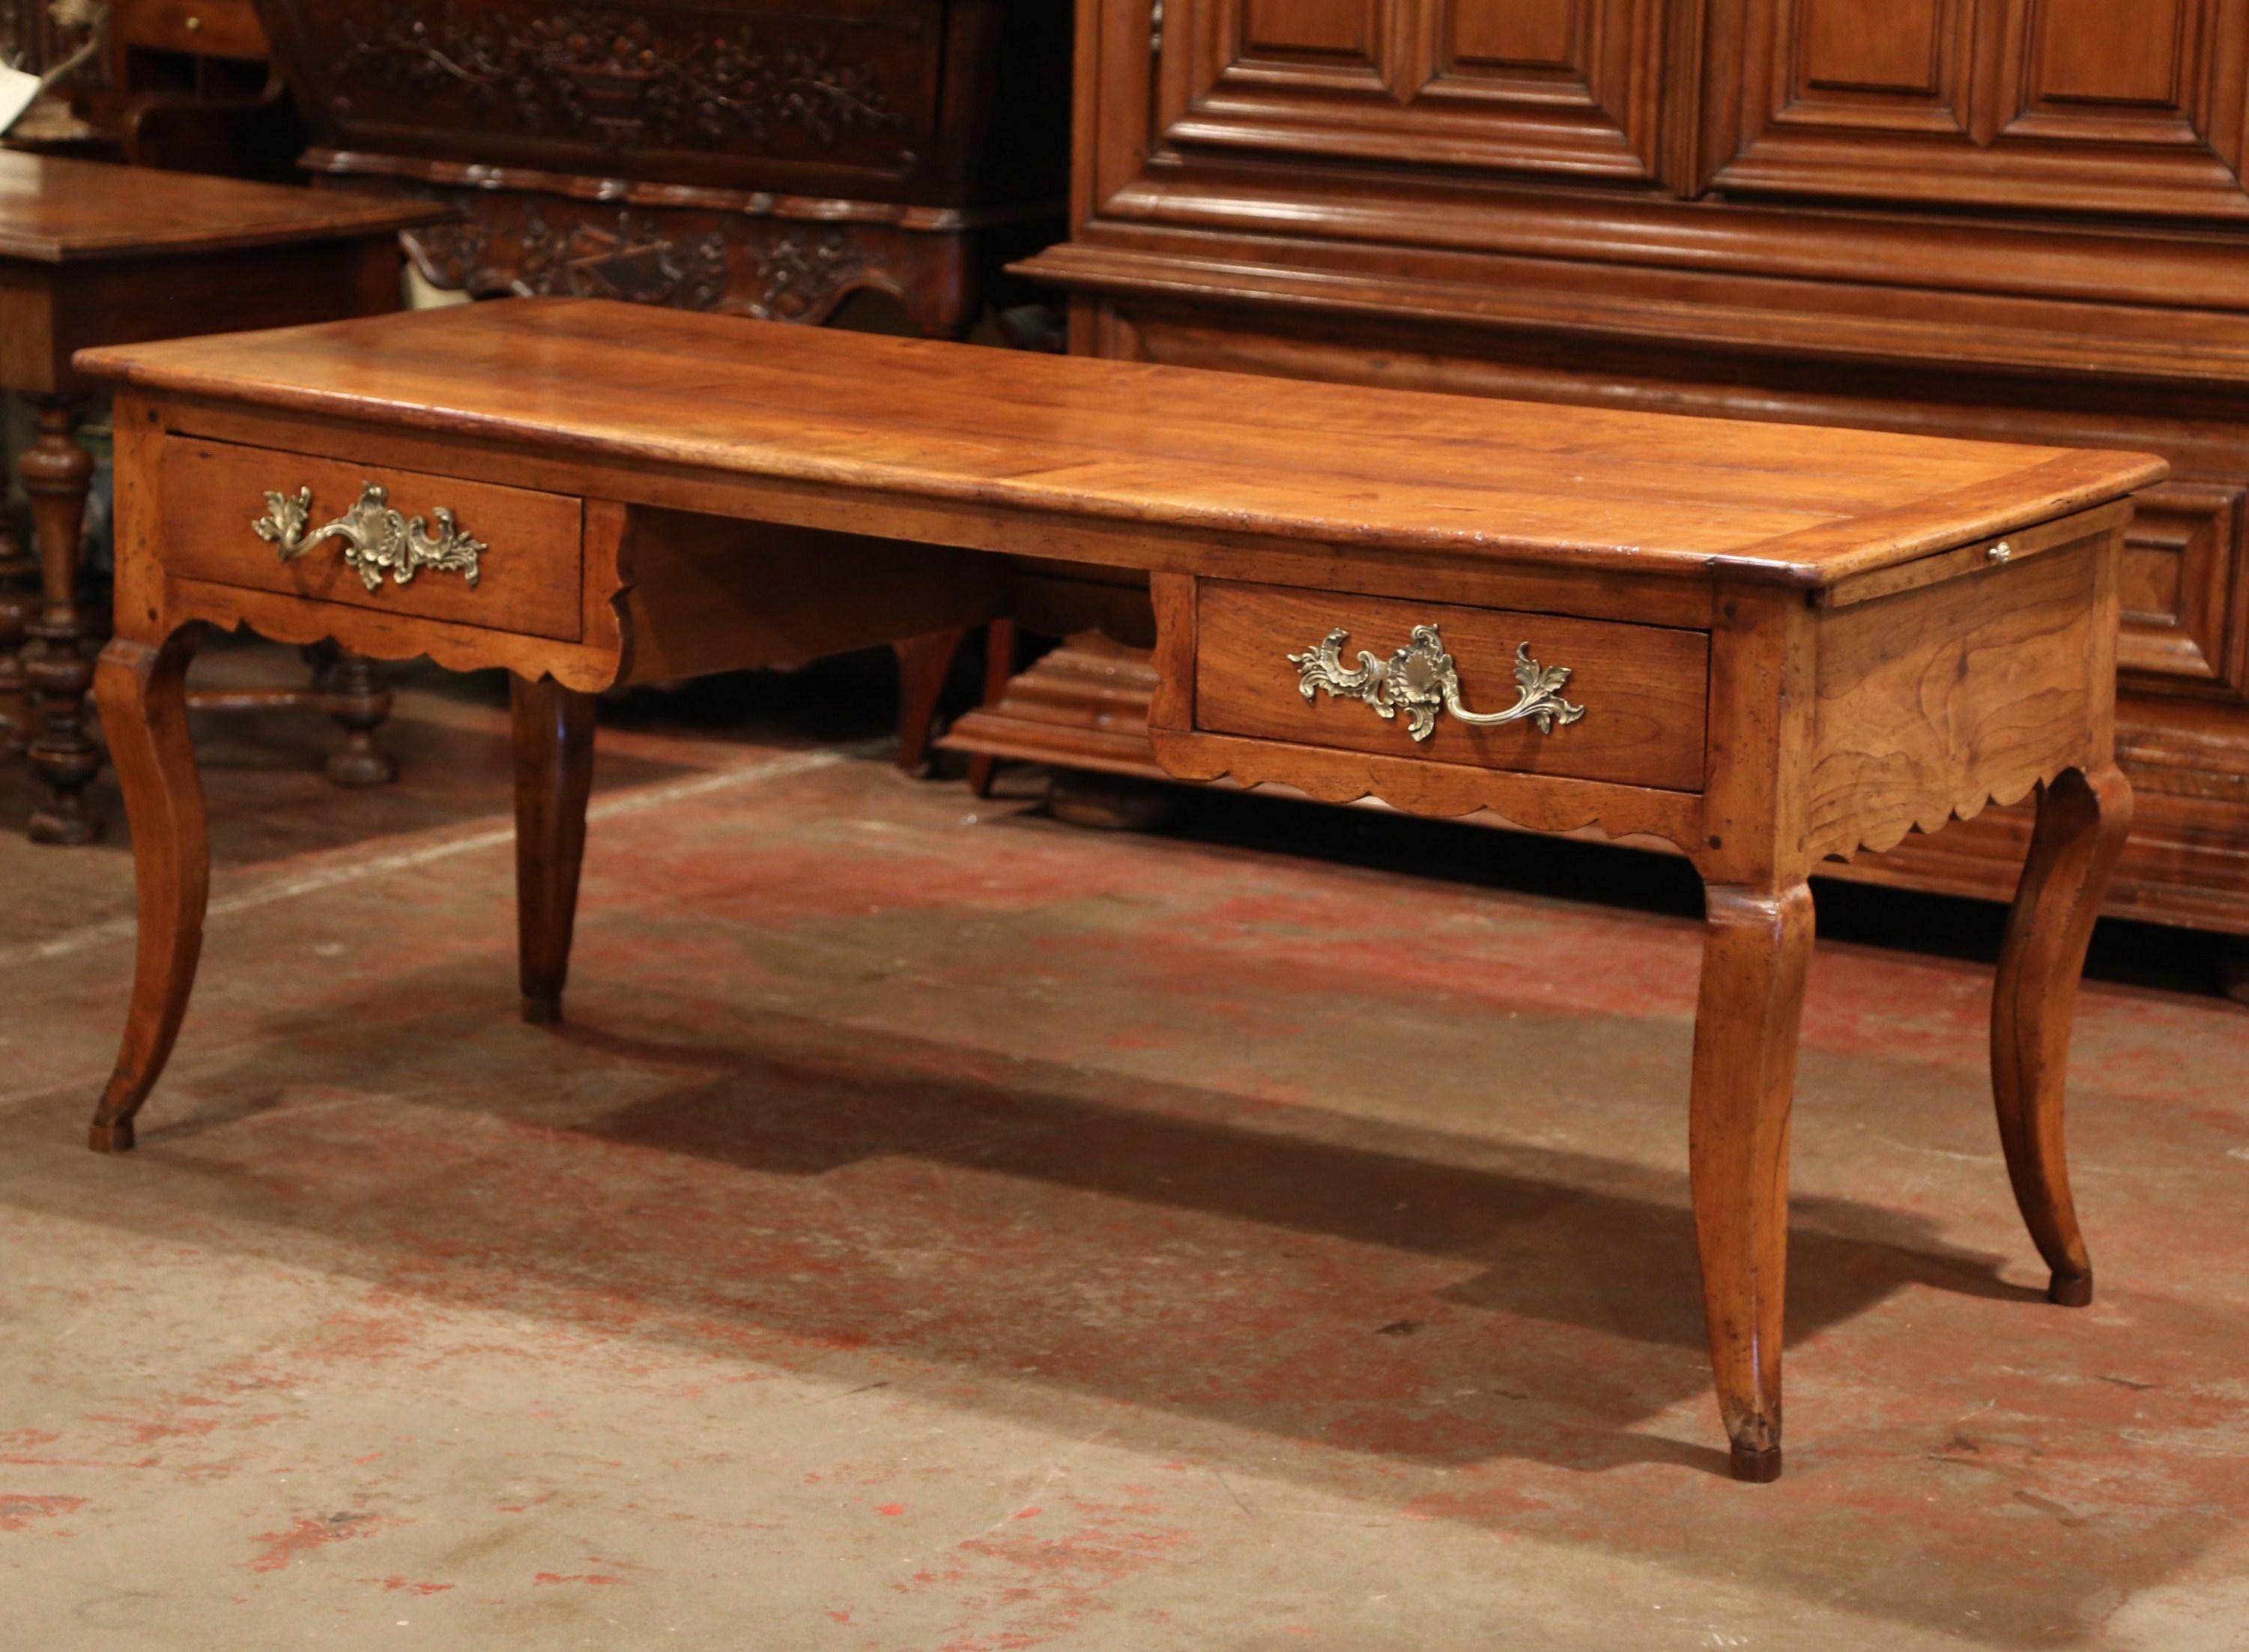 18th Century French Louis XV Carved Cherry Desk with Drawers and Pullout Trays 1